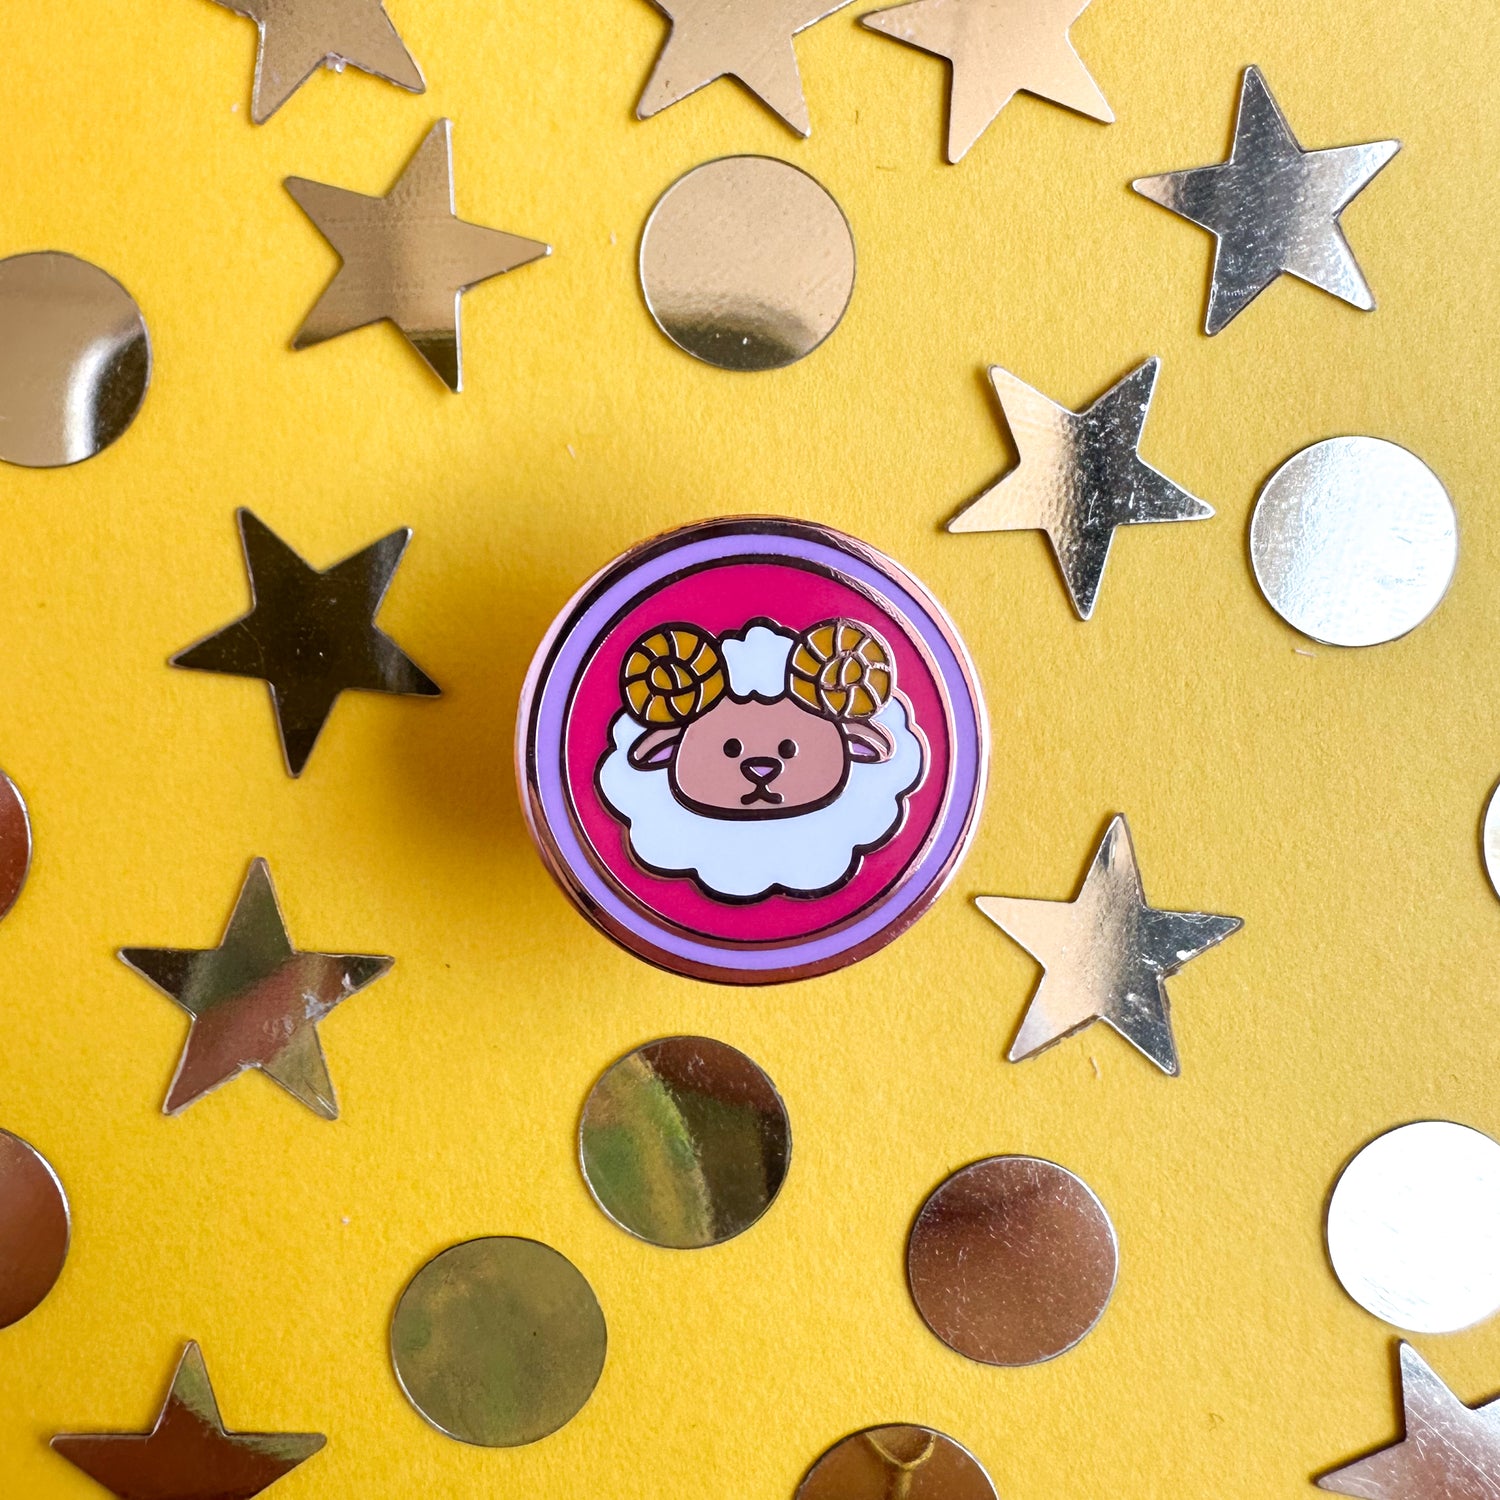 A circular enamel pin with a cute sheep on it sitting on a yellow background with gold glitter stars and circles around it. 